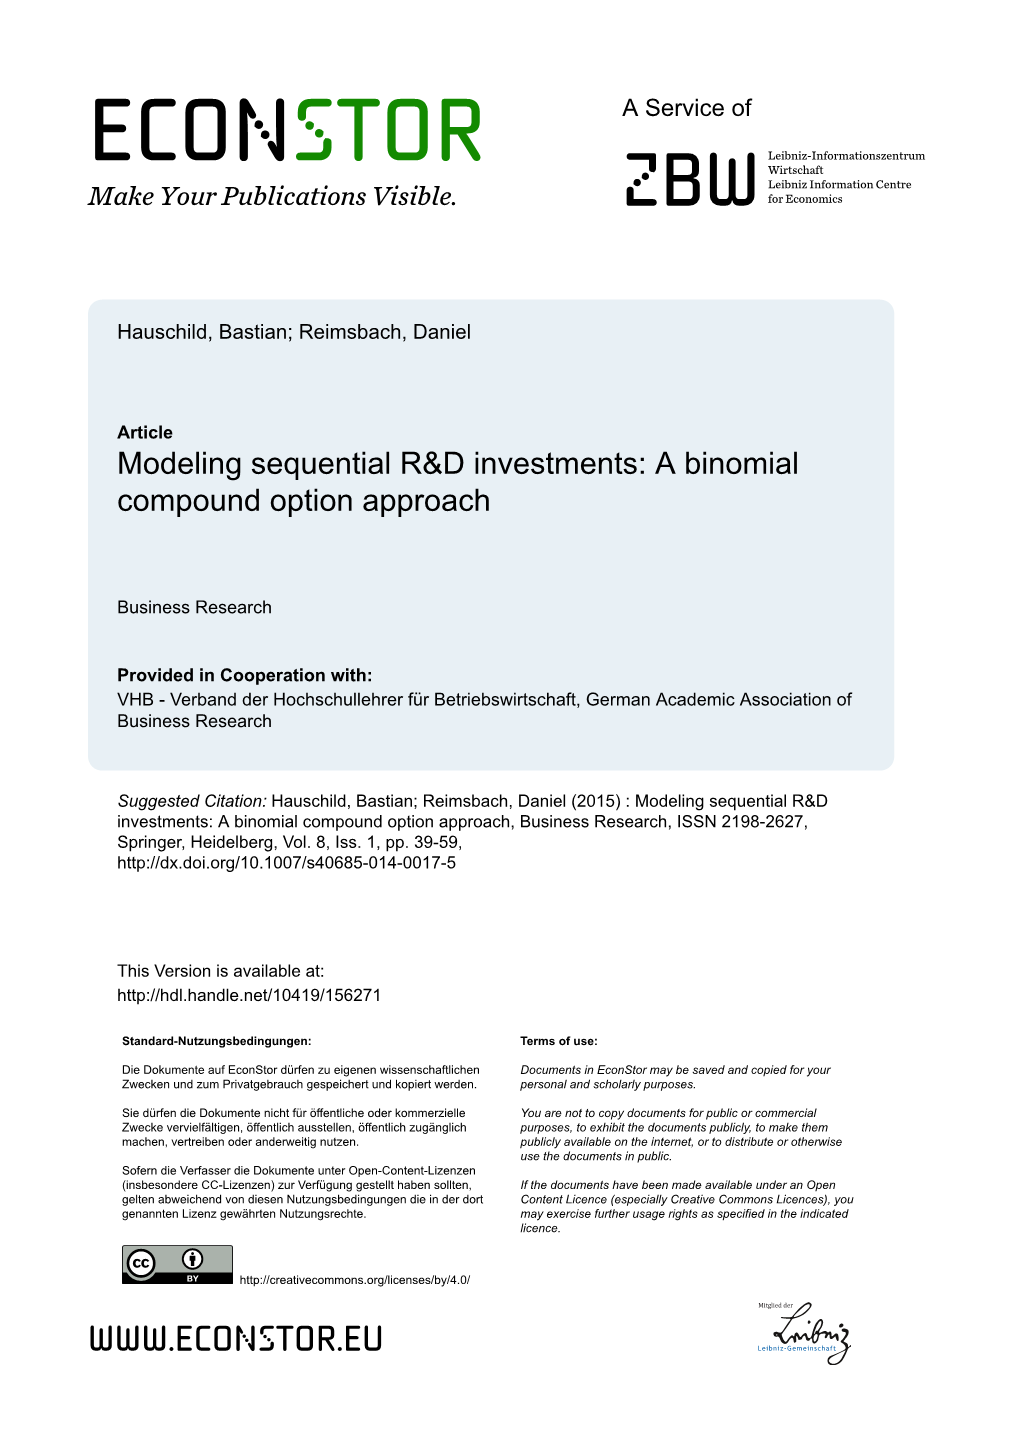 Modeling Sequential R&D Investments: a Binomial Compound Option